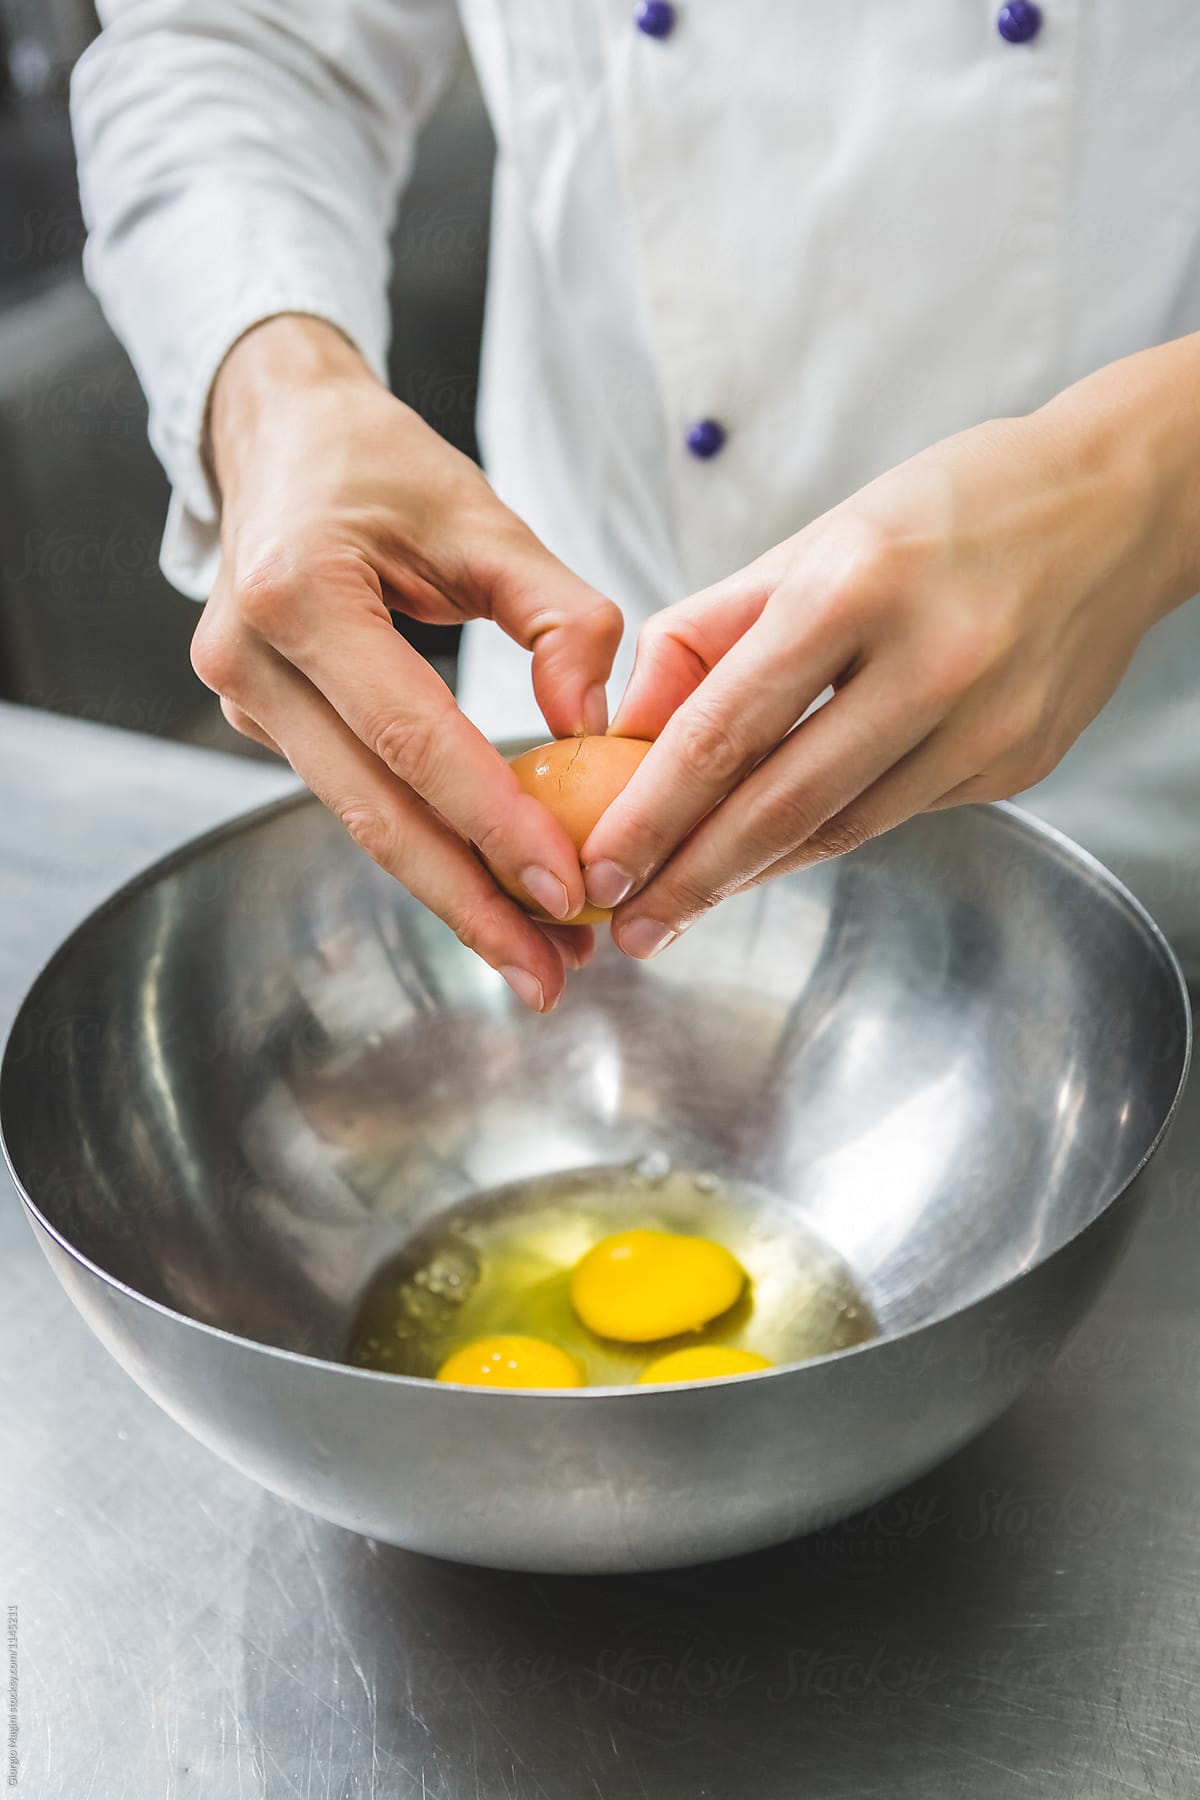 Pastry Chef Breaking some Eggs for a Cake